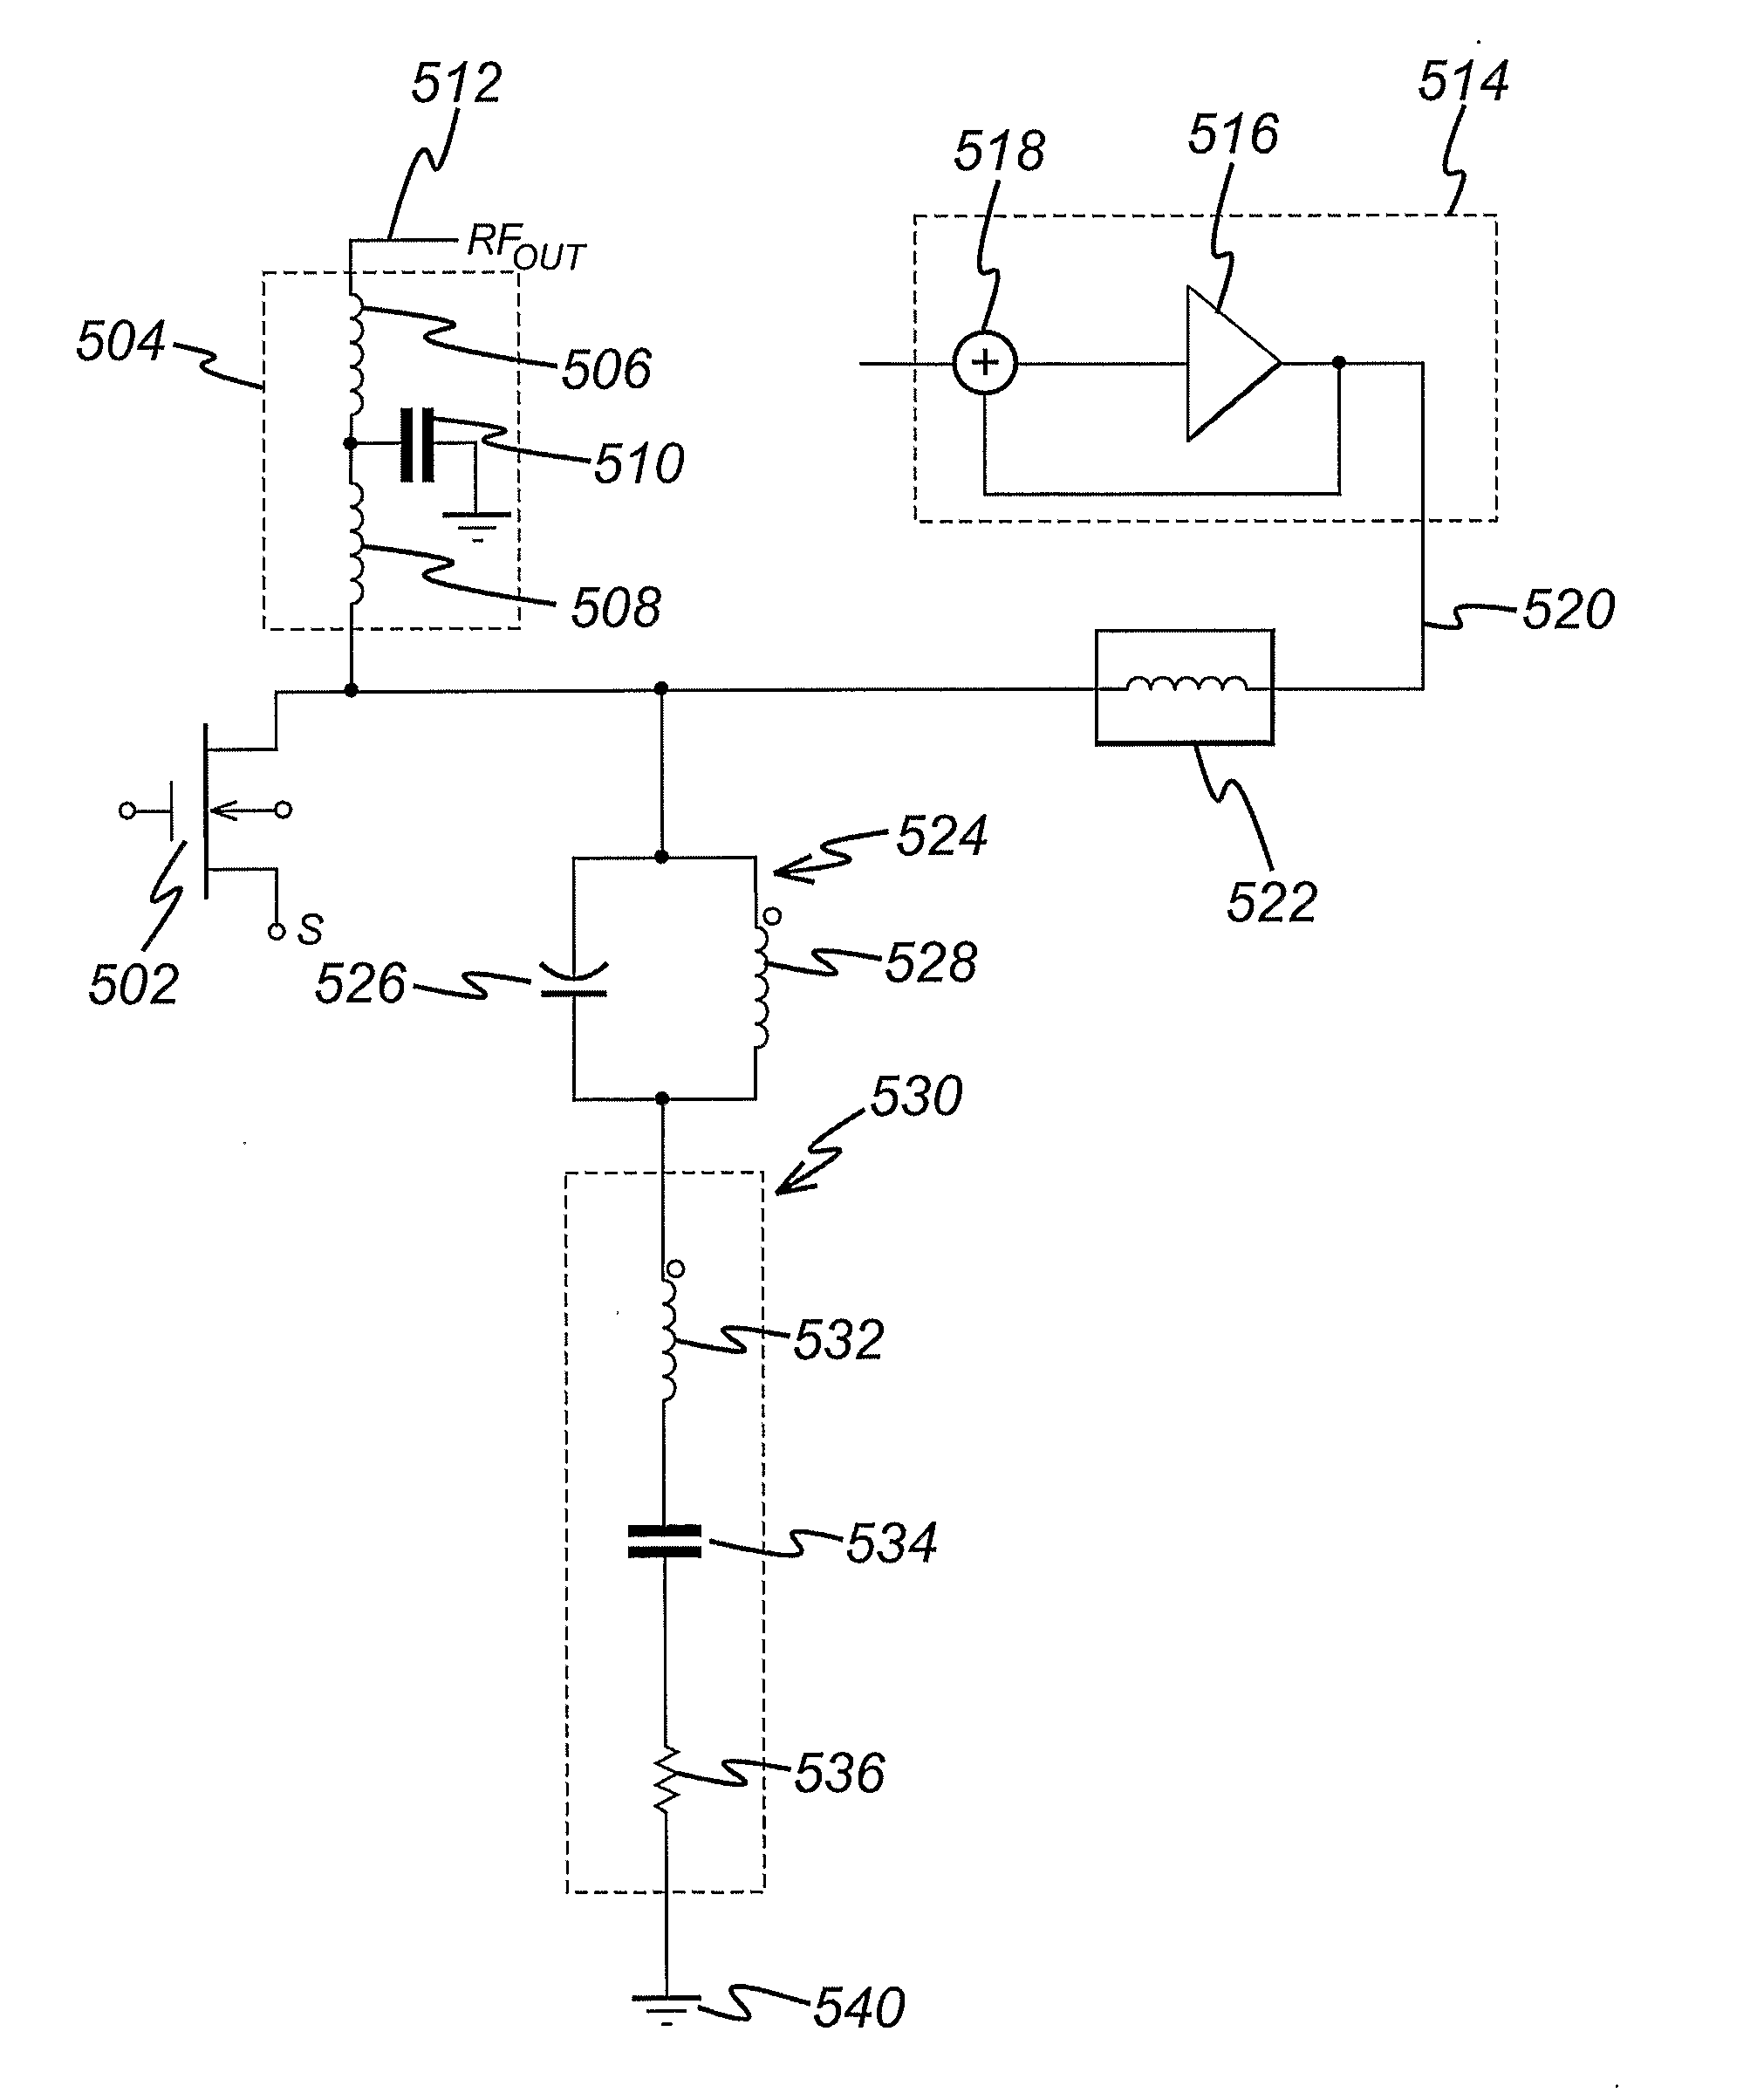 Power Amplifier with Stabilising Network